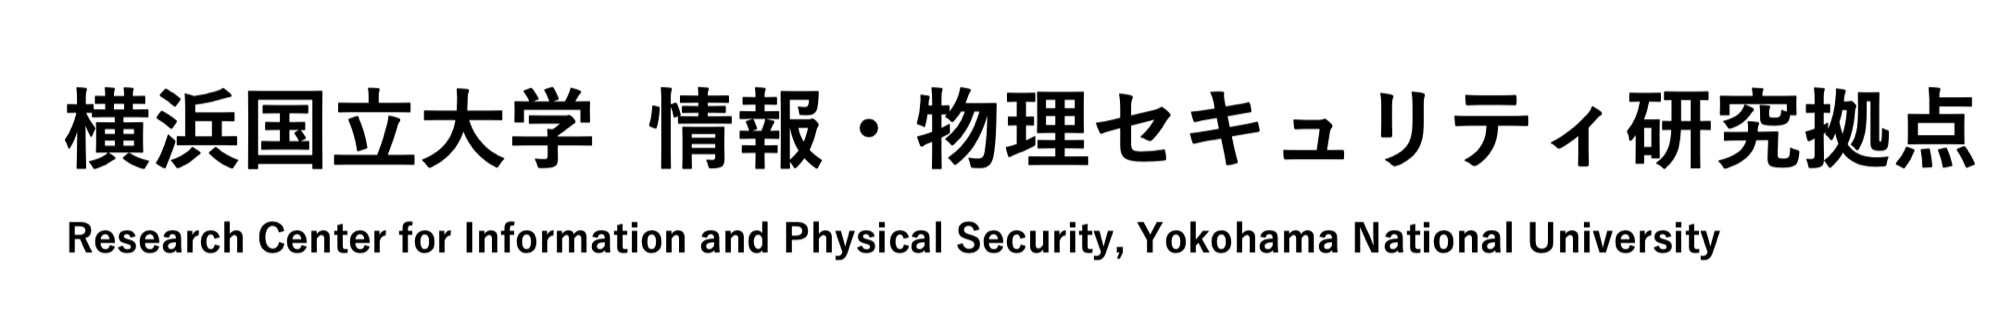 Information and Physical Security Research Group at Yokohama National University, Japan